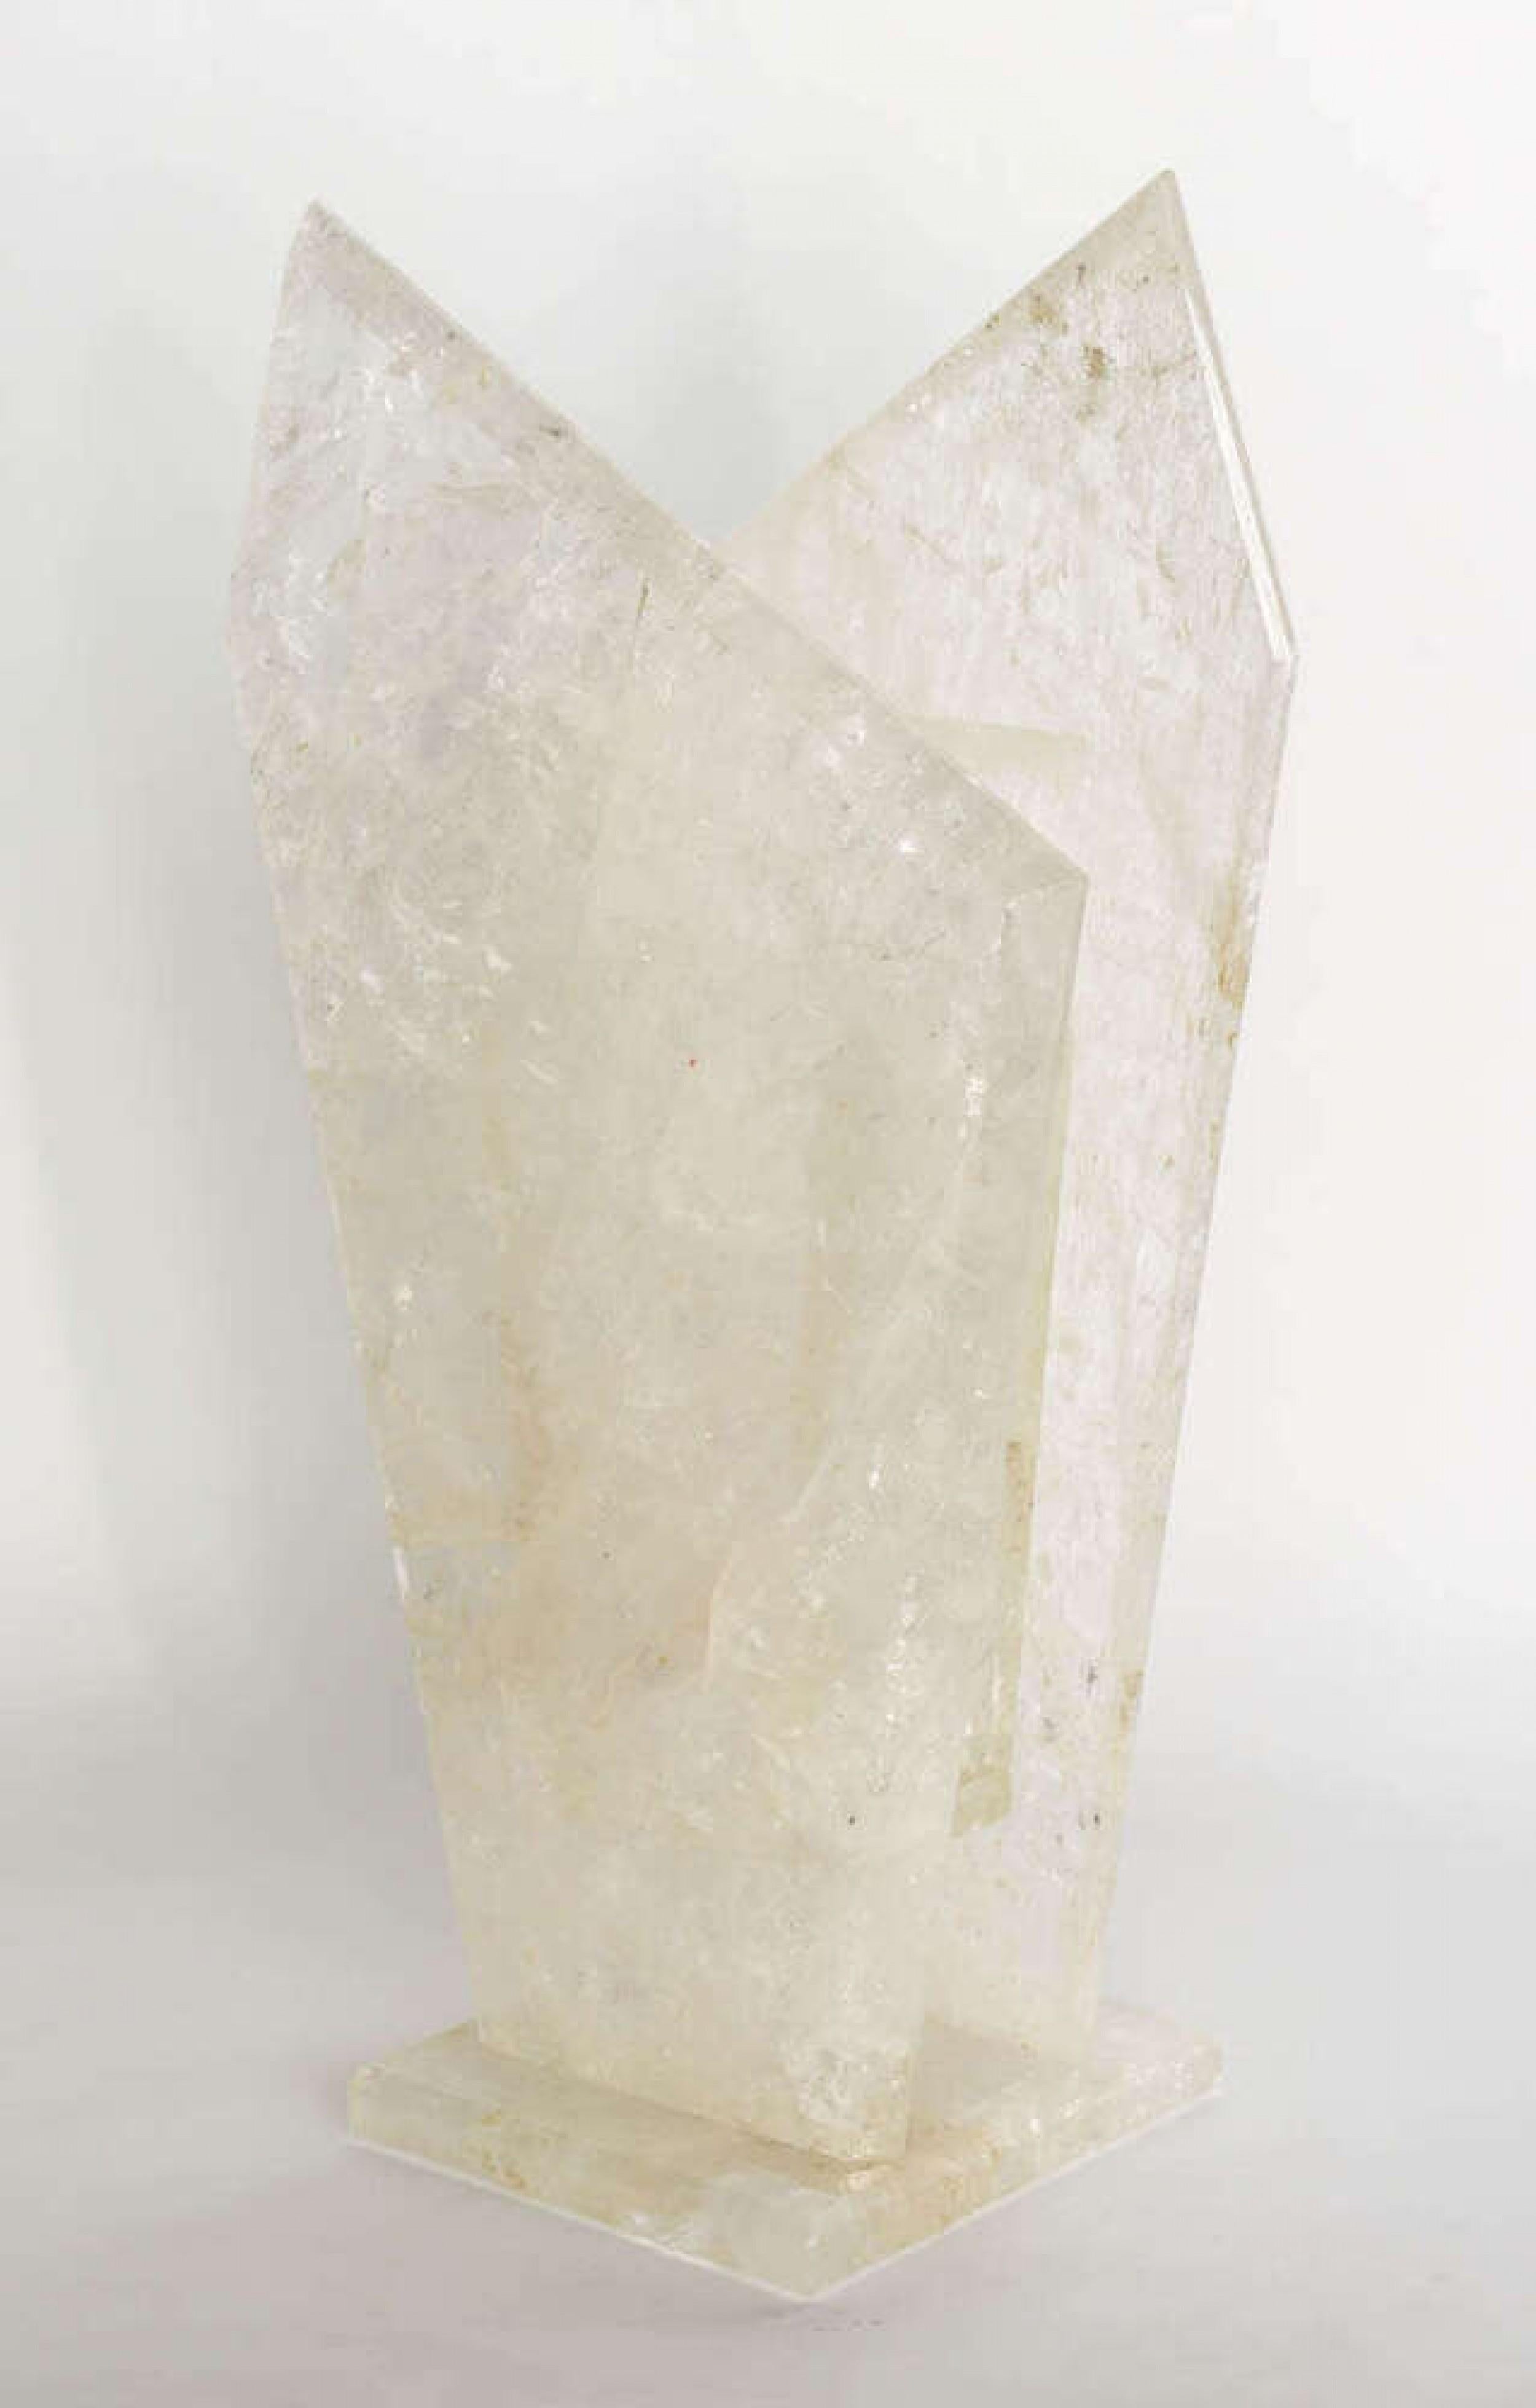 Contemporary American large white rock crystal vase.